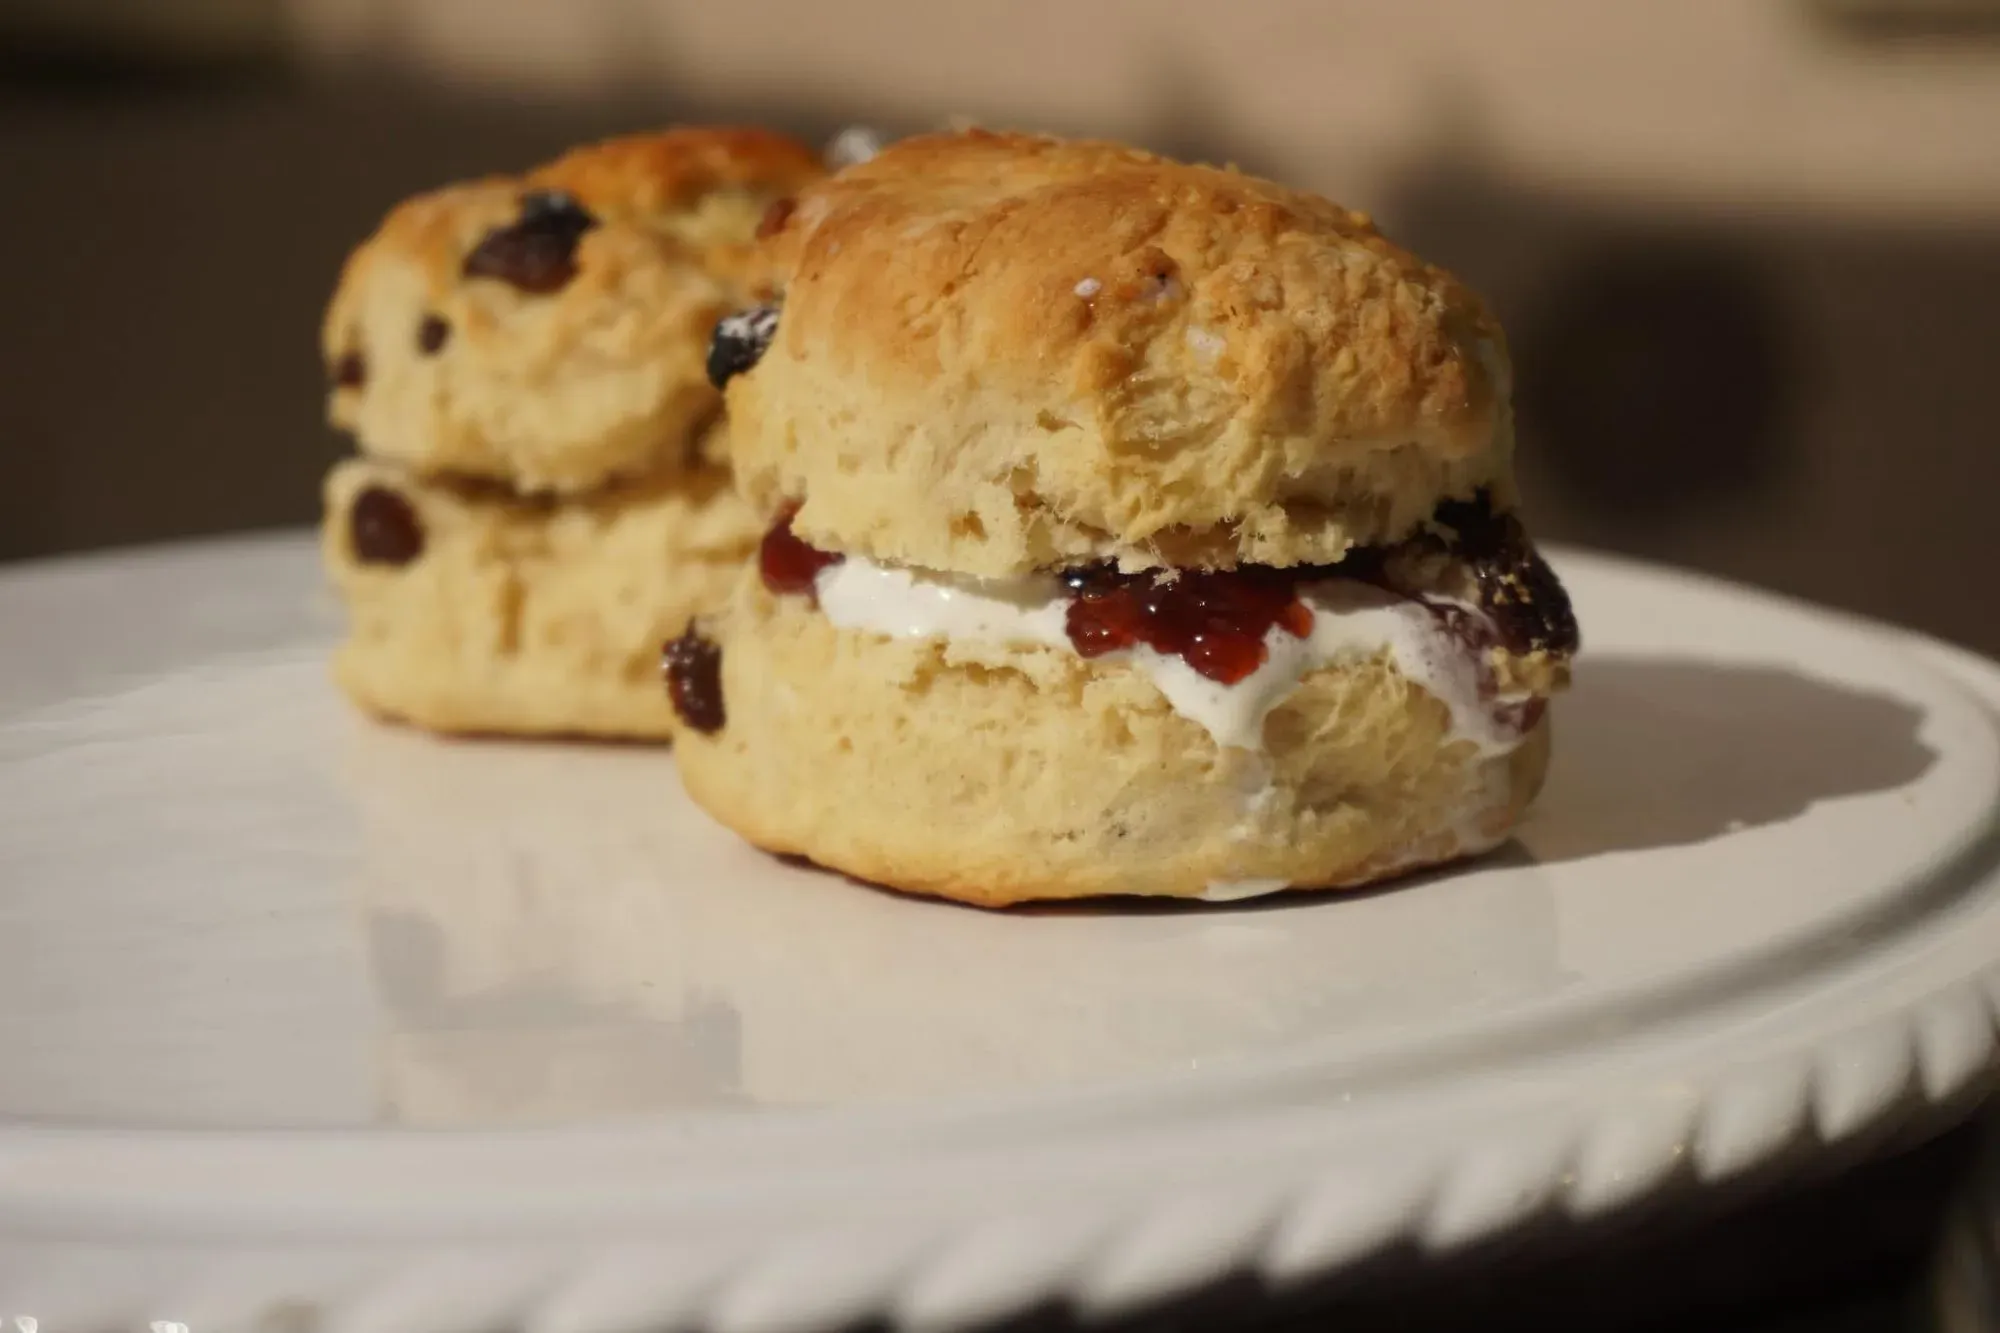 Fruit scones with clotted cream and jam on a plate.